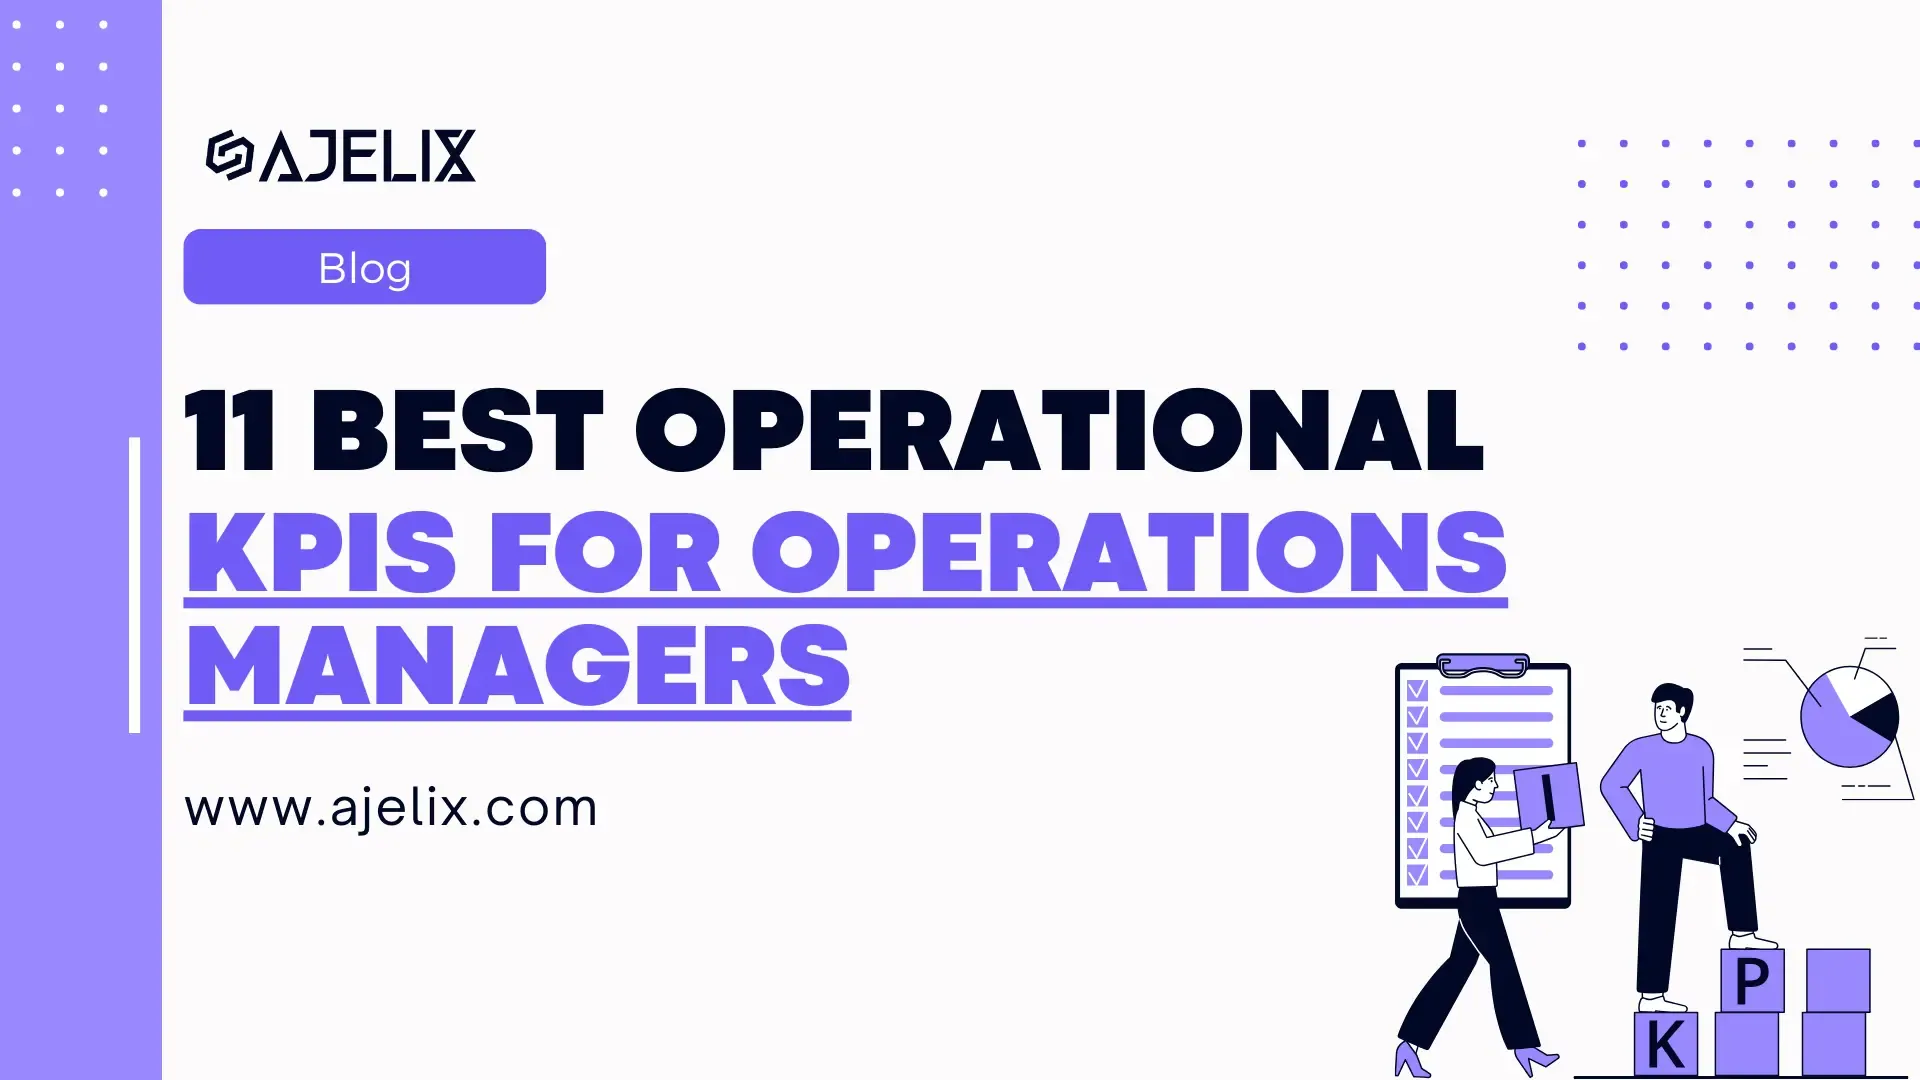 111 Best operational kpis for operation managers blog article banner made by author